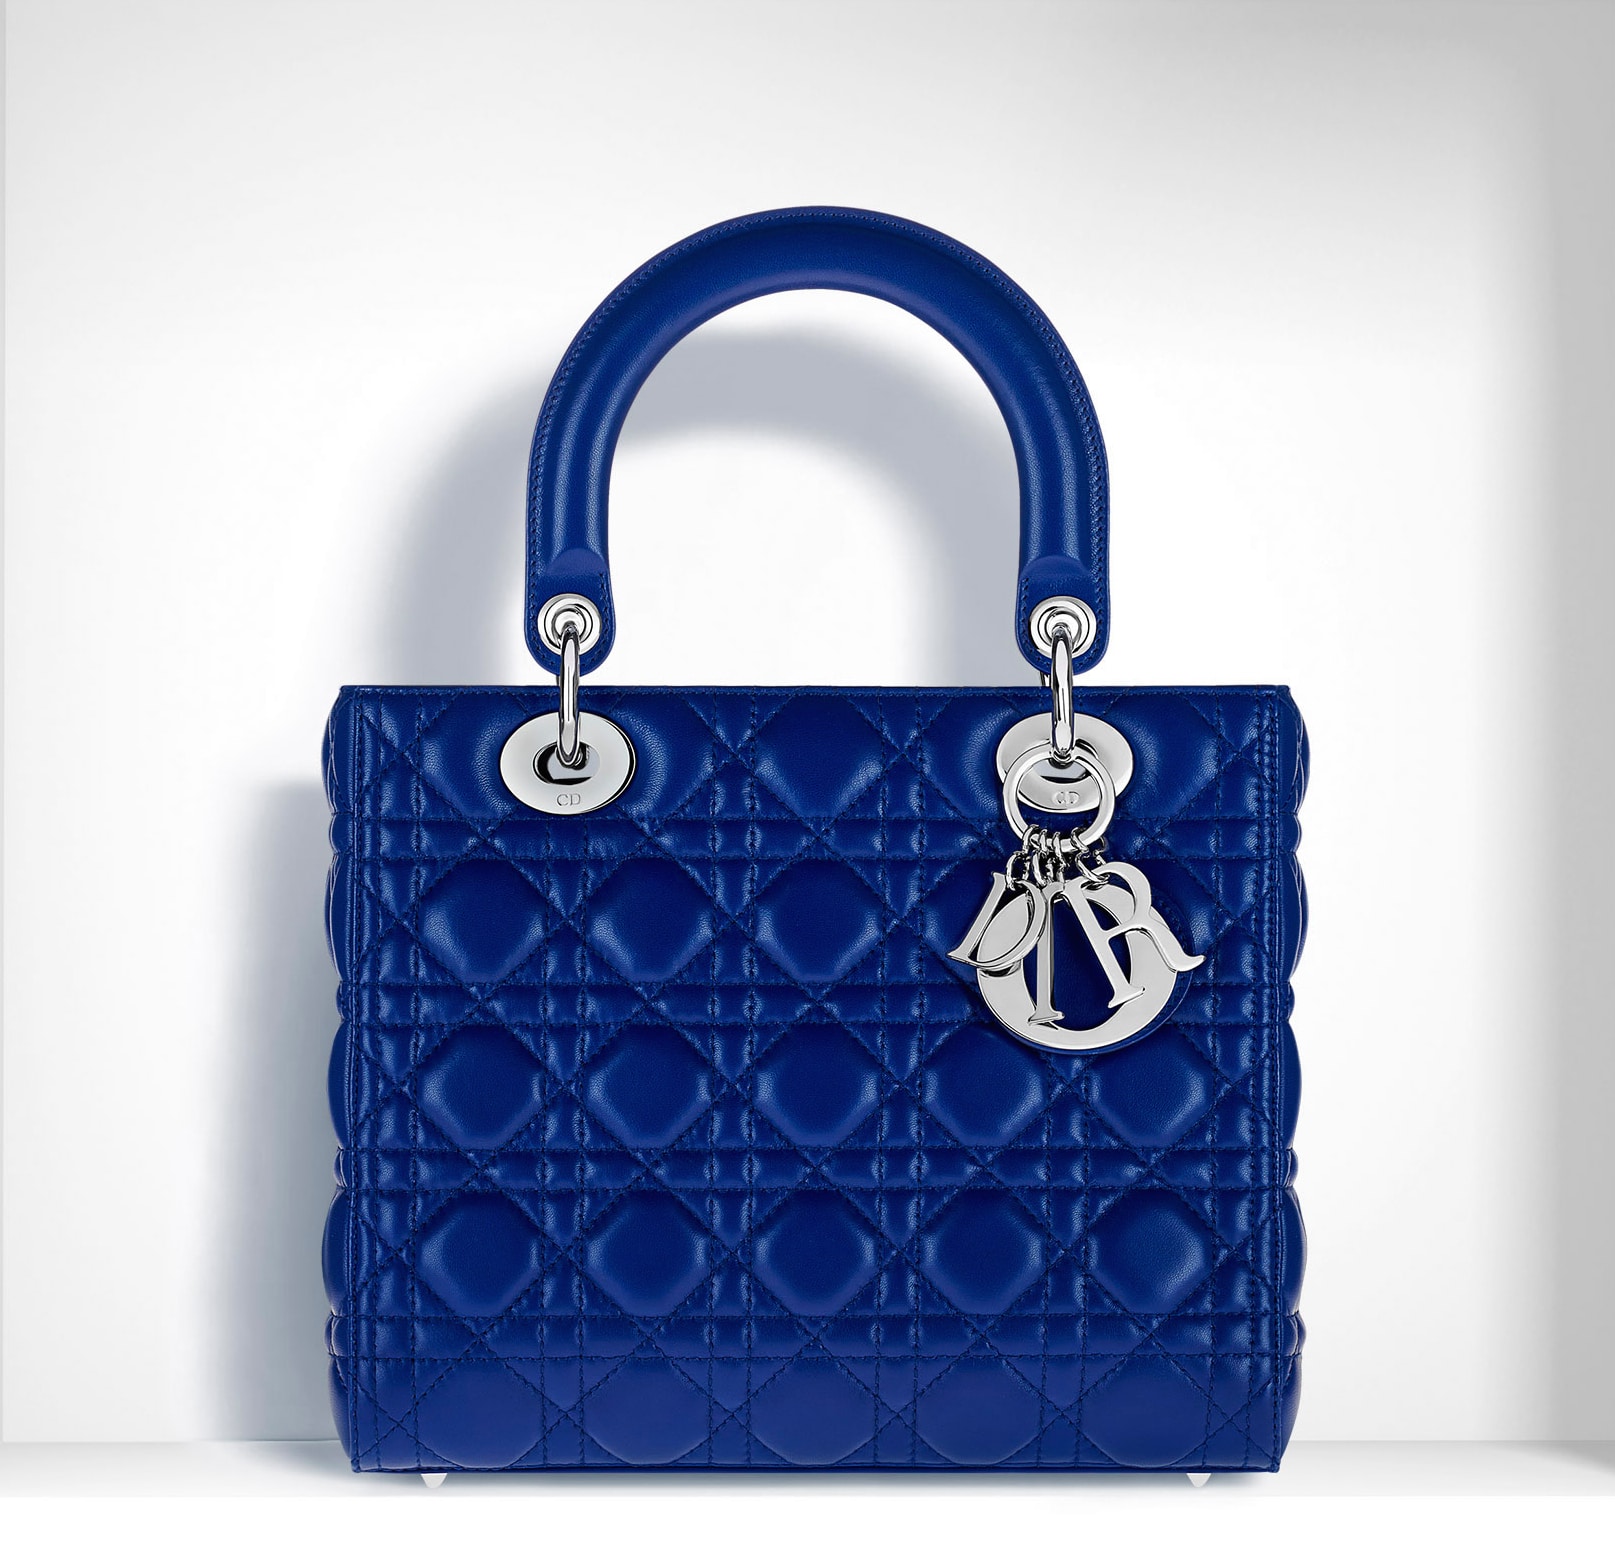 More Dior Fall / Winter 2015 Bags and Europe Price Increase on ...